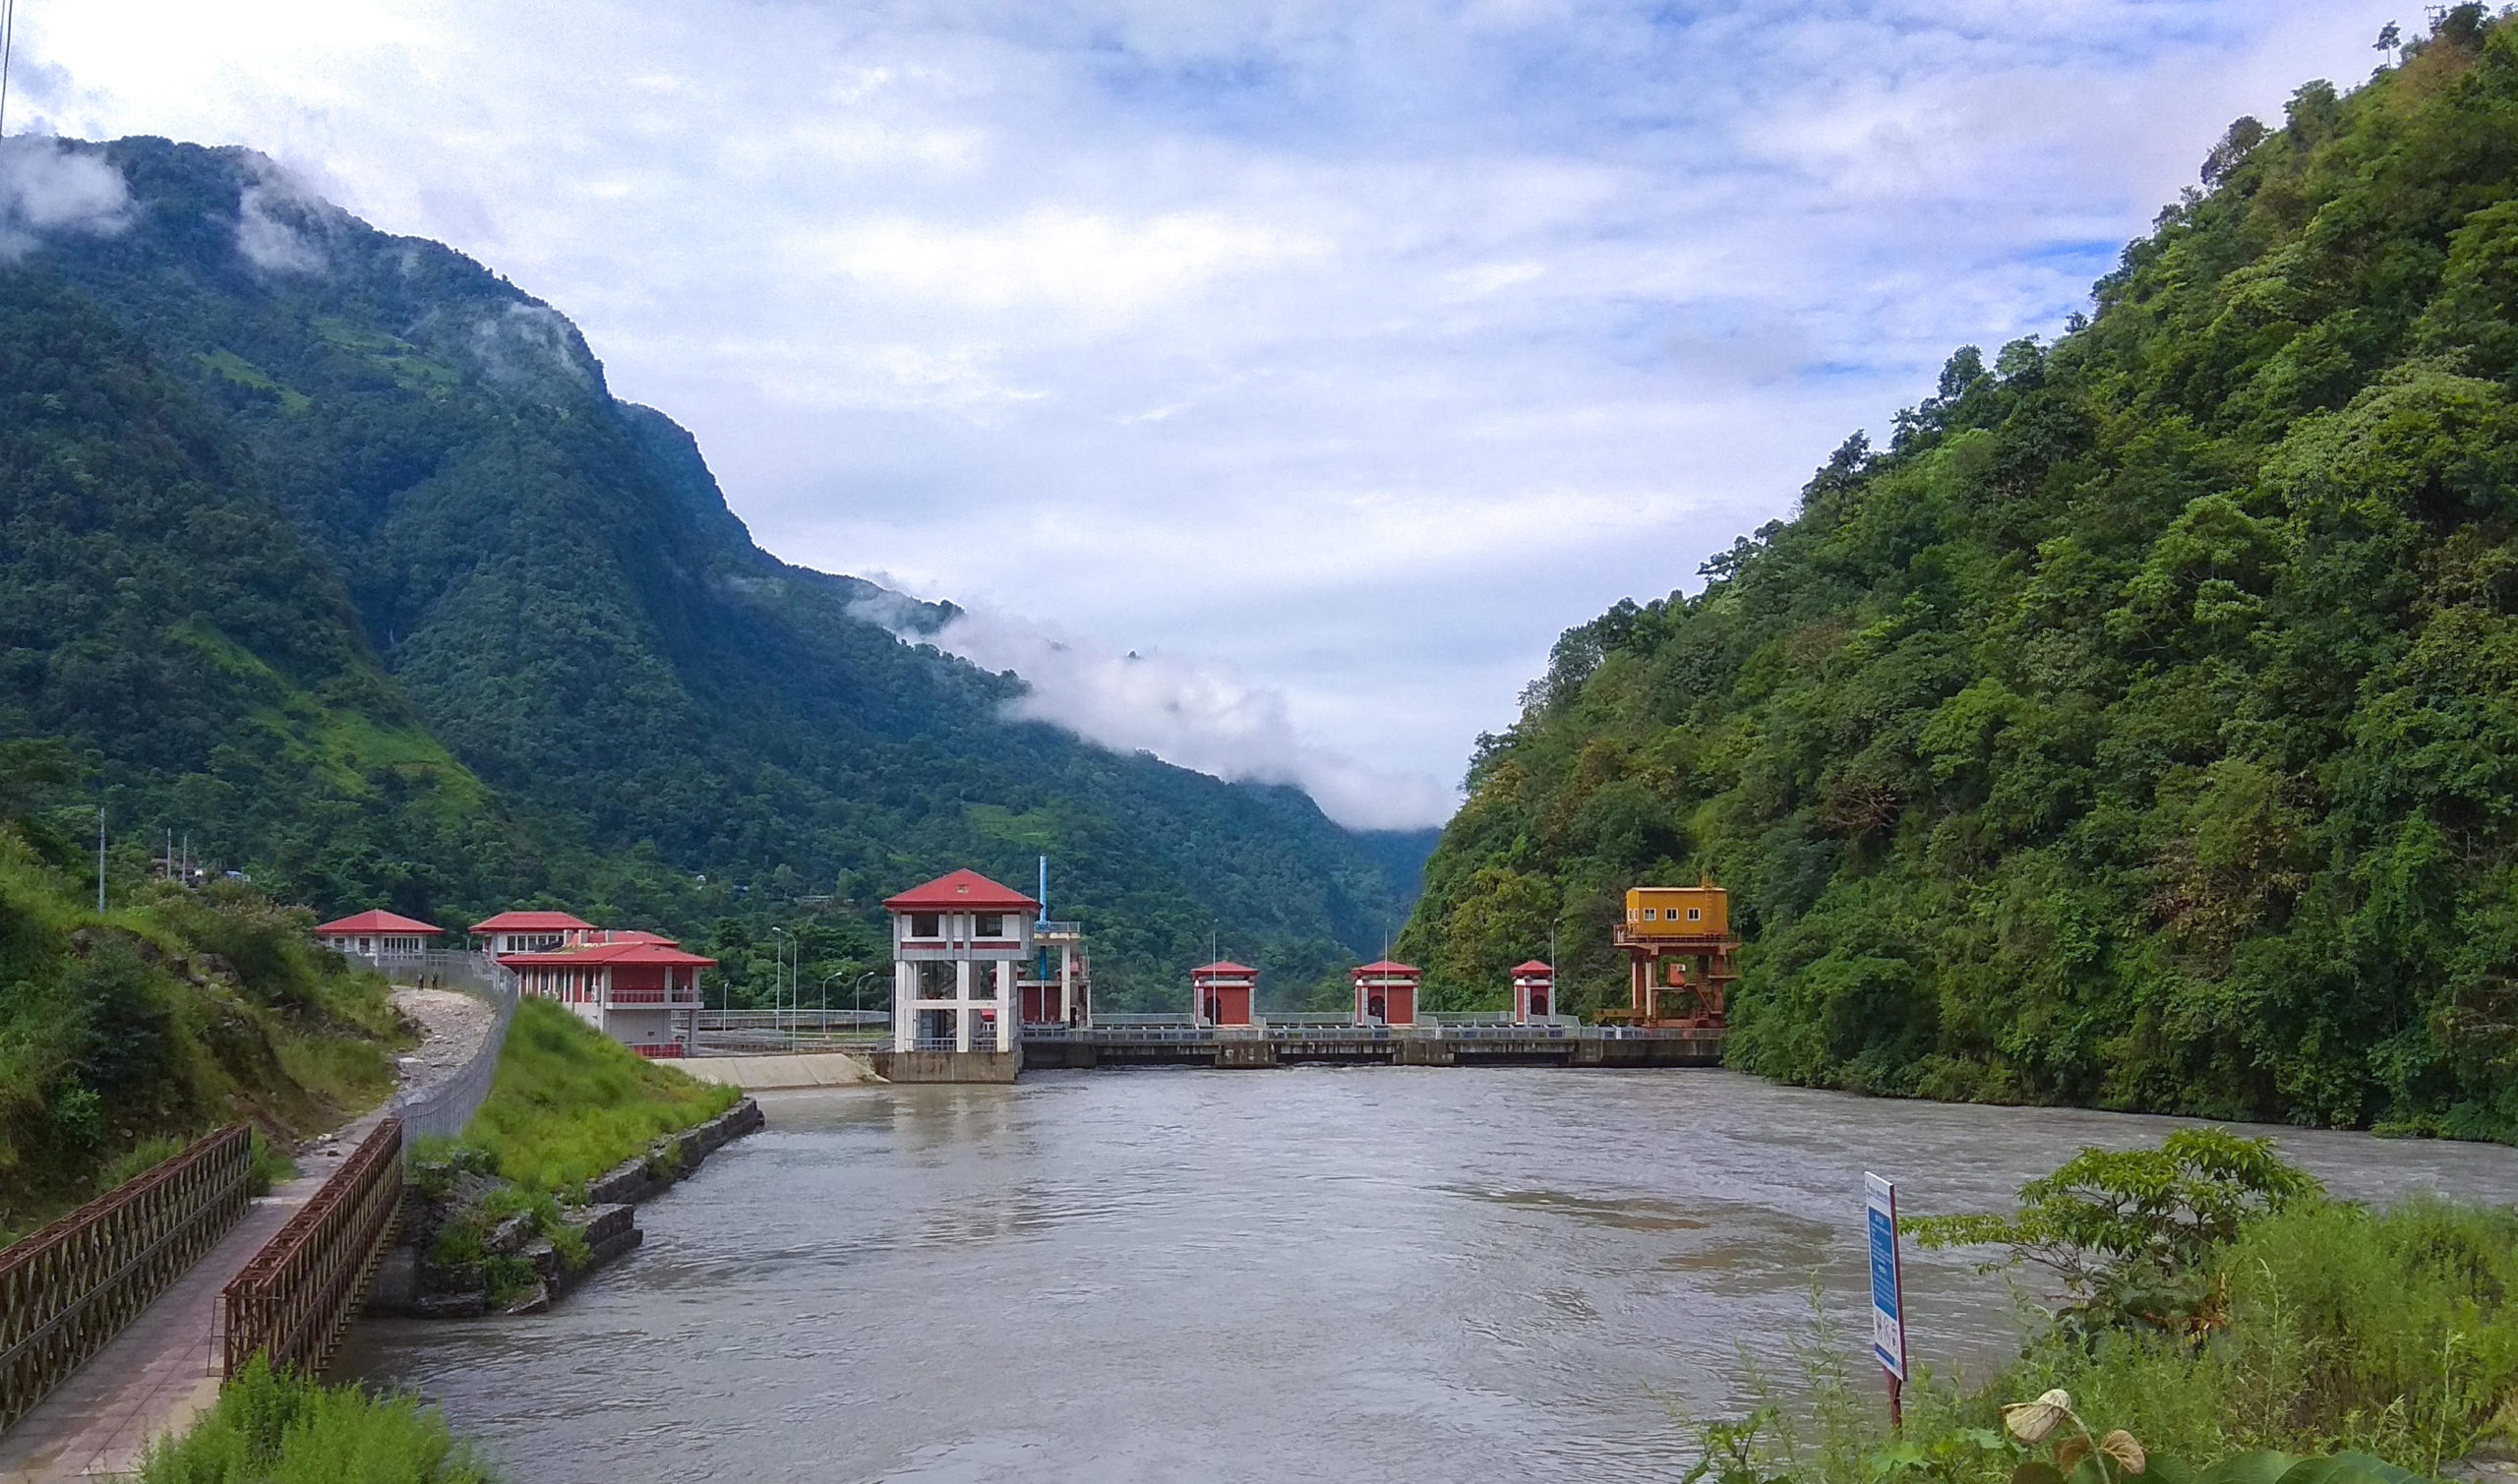 <p>Nepal has ambitions to further exploit its hydropower potential, already in evidence in places like the Upper Marsyangdi A Hydroelectric Station in Lamjung, west Nepal (Image: Bishnu Bidari / Alamy)</p>